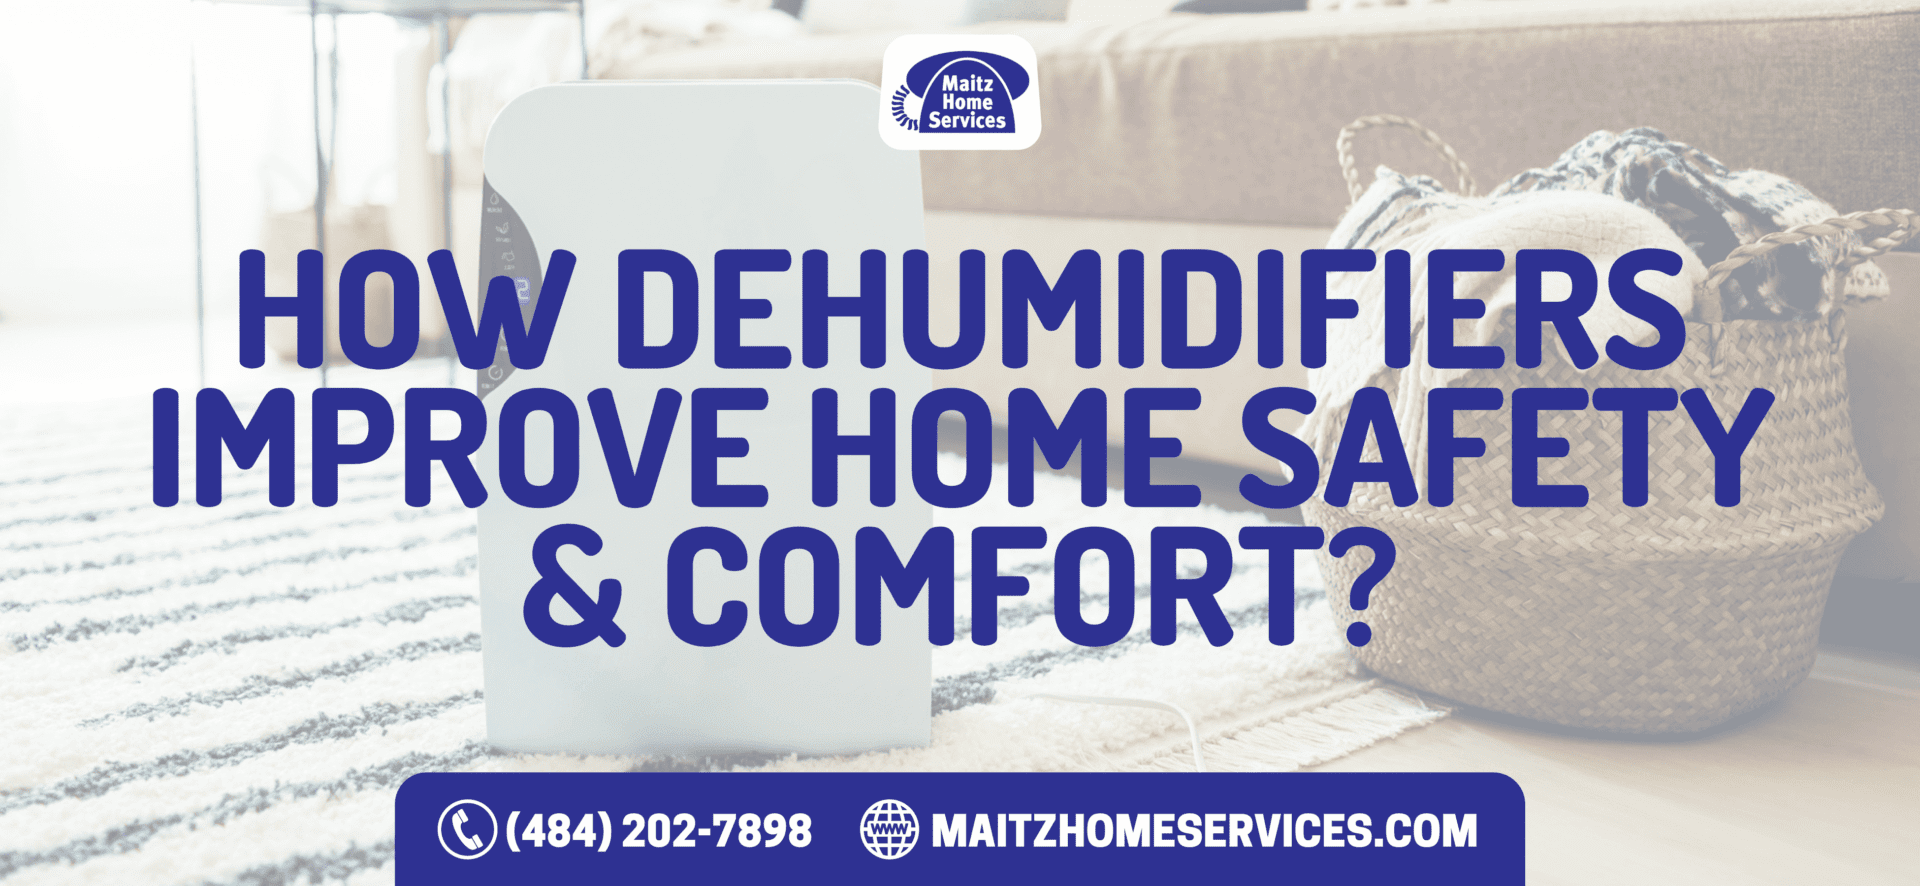 How Dehumidifiers Improve Home Safety & Comfort?